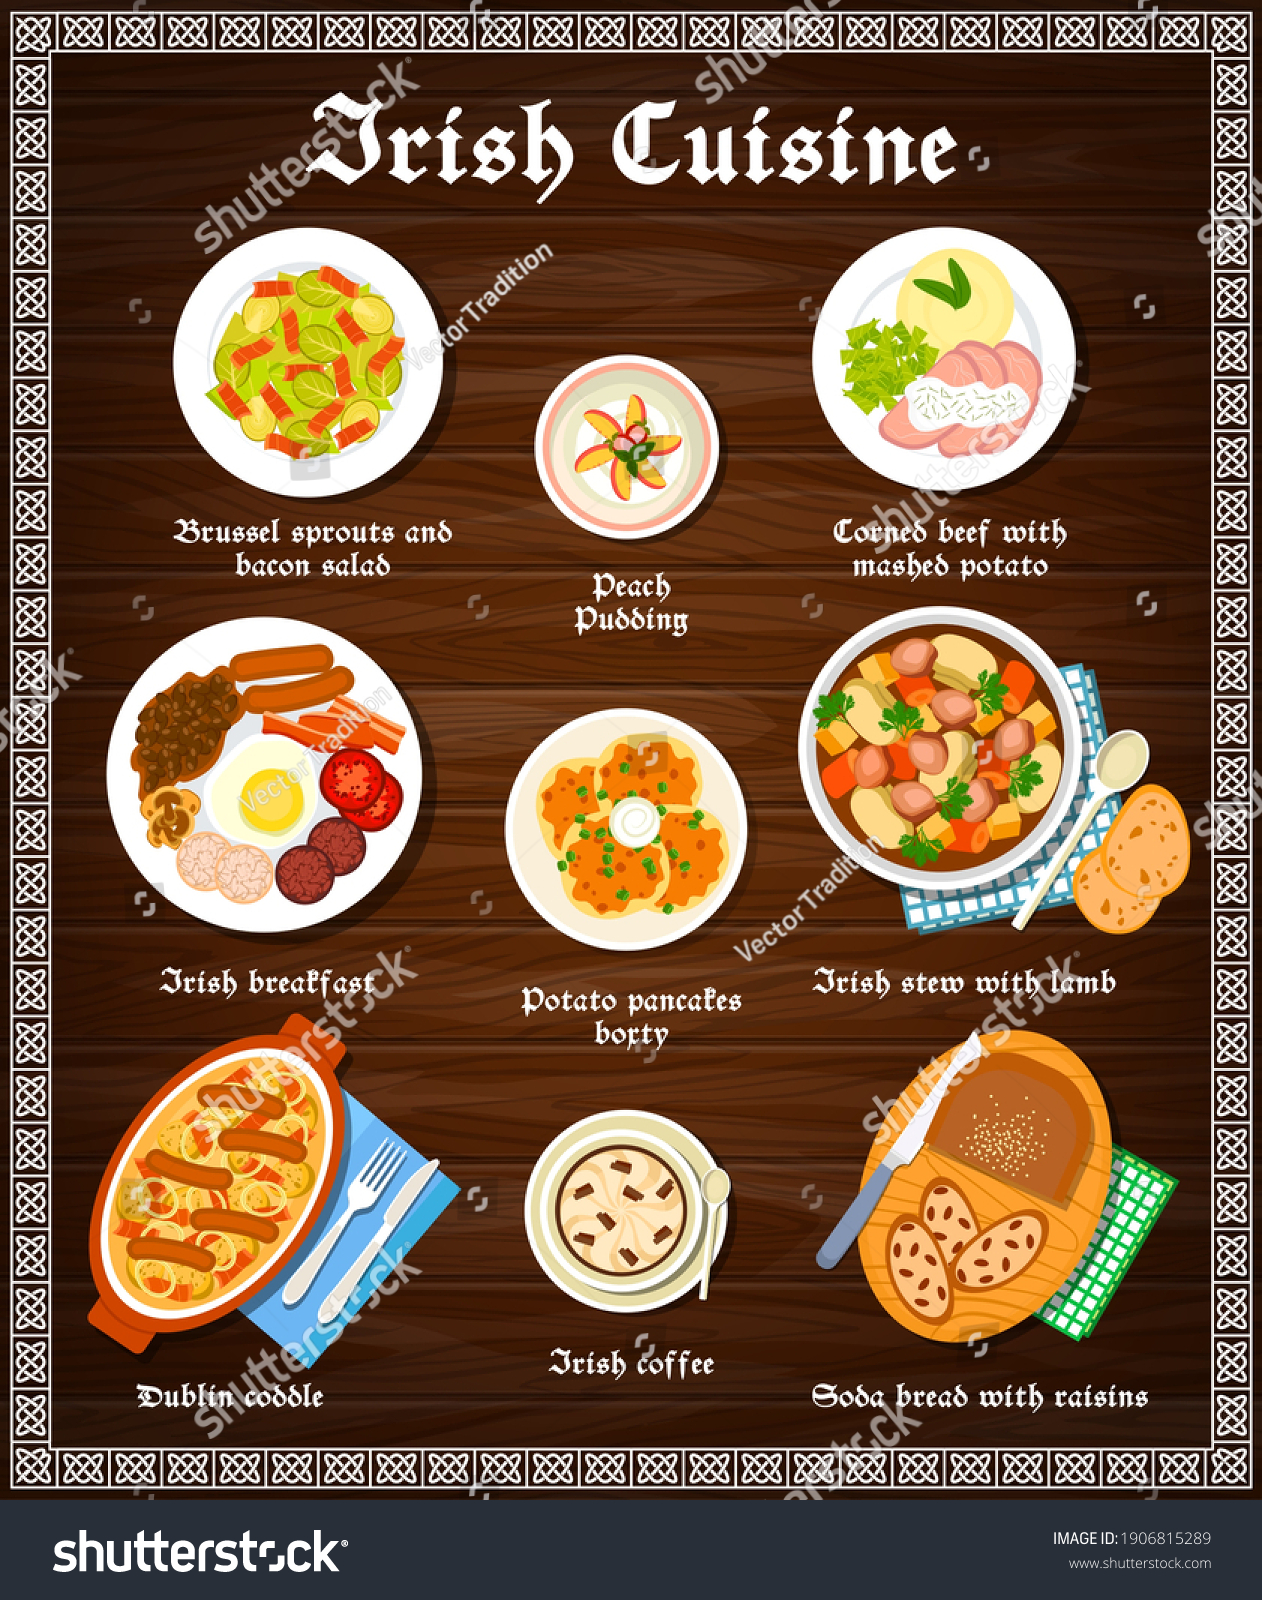 SVG of Irish food cuisine menu dishes and Ireland meals, vector restaurant lunch and dinner. Irish traditional food menu breakfast peach pudding, Brussels sprouts, potato pancakes boxty and coffee svg